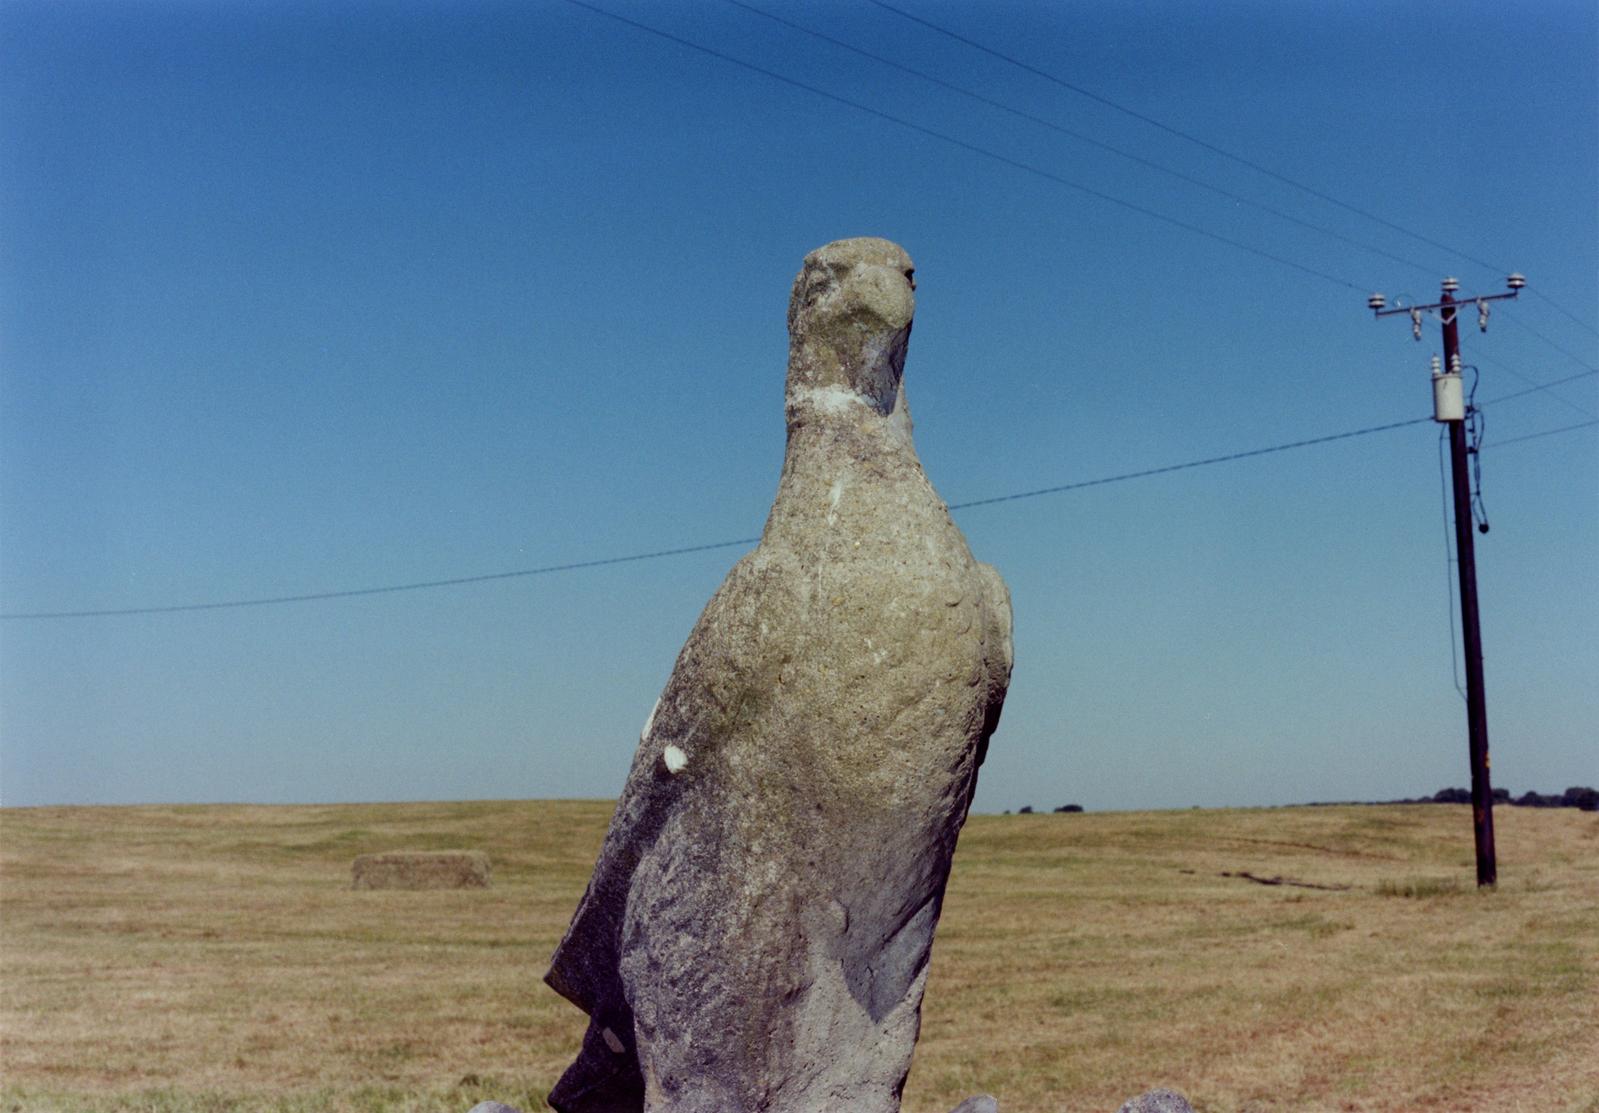 Samuel Laurence Cunnane: Bird Statue, 2019, Hand-printed C-type print on archival photo paper, edition of 3 + 1AP, 17.8 x 25.5 cm/7 x 10 in image size,40.2 x 48 cm/15.8 x 18.9 in framed size | Samuel Laurence Cunnane | Saturday 5 September – Saturday 10 October 2020 | Kerlin Gallery